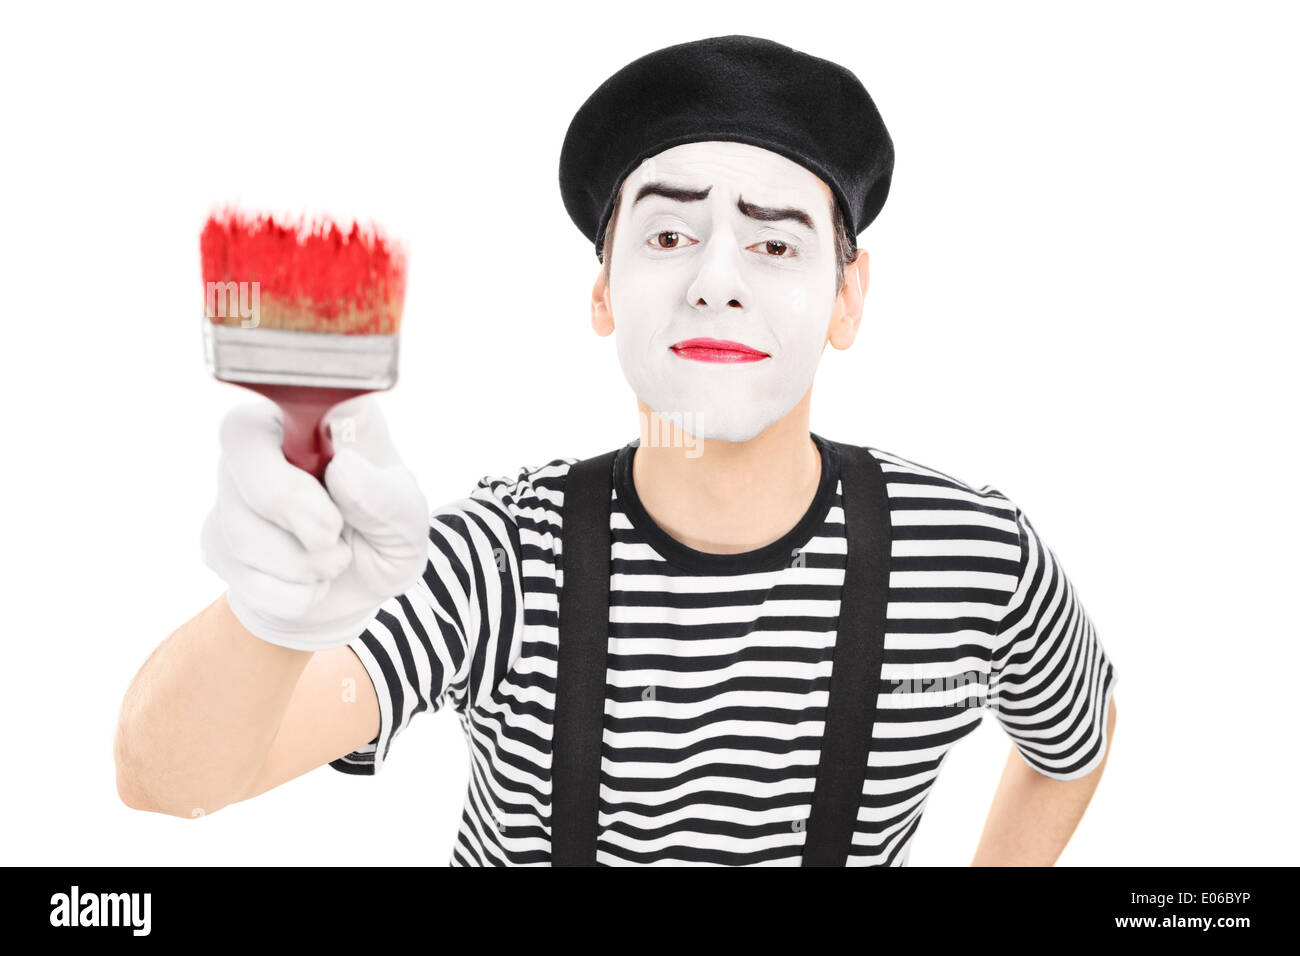 Mime artist holding a paintbrush Stock Photo